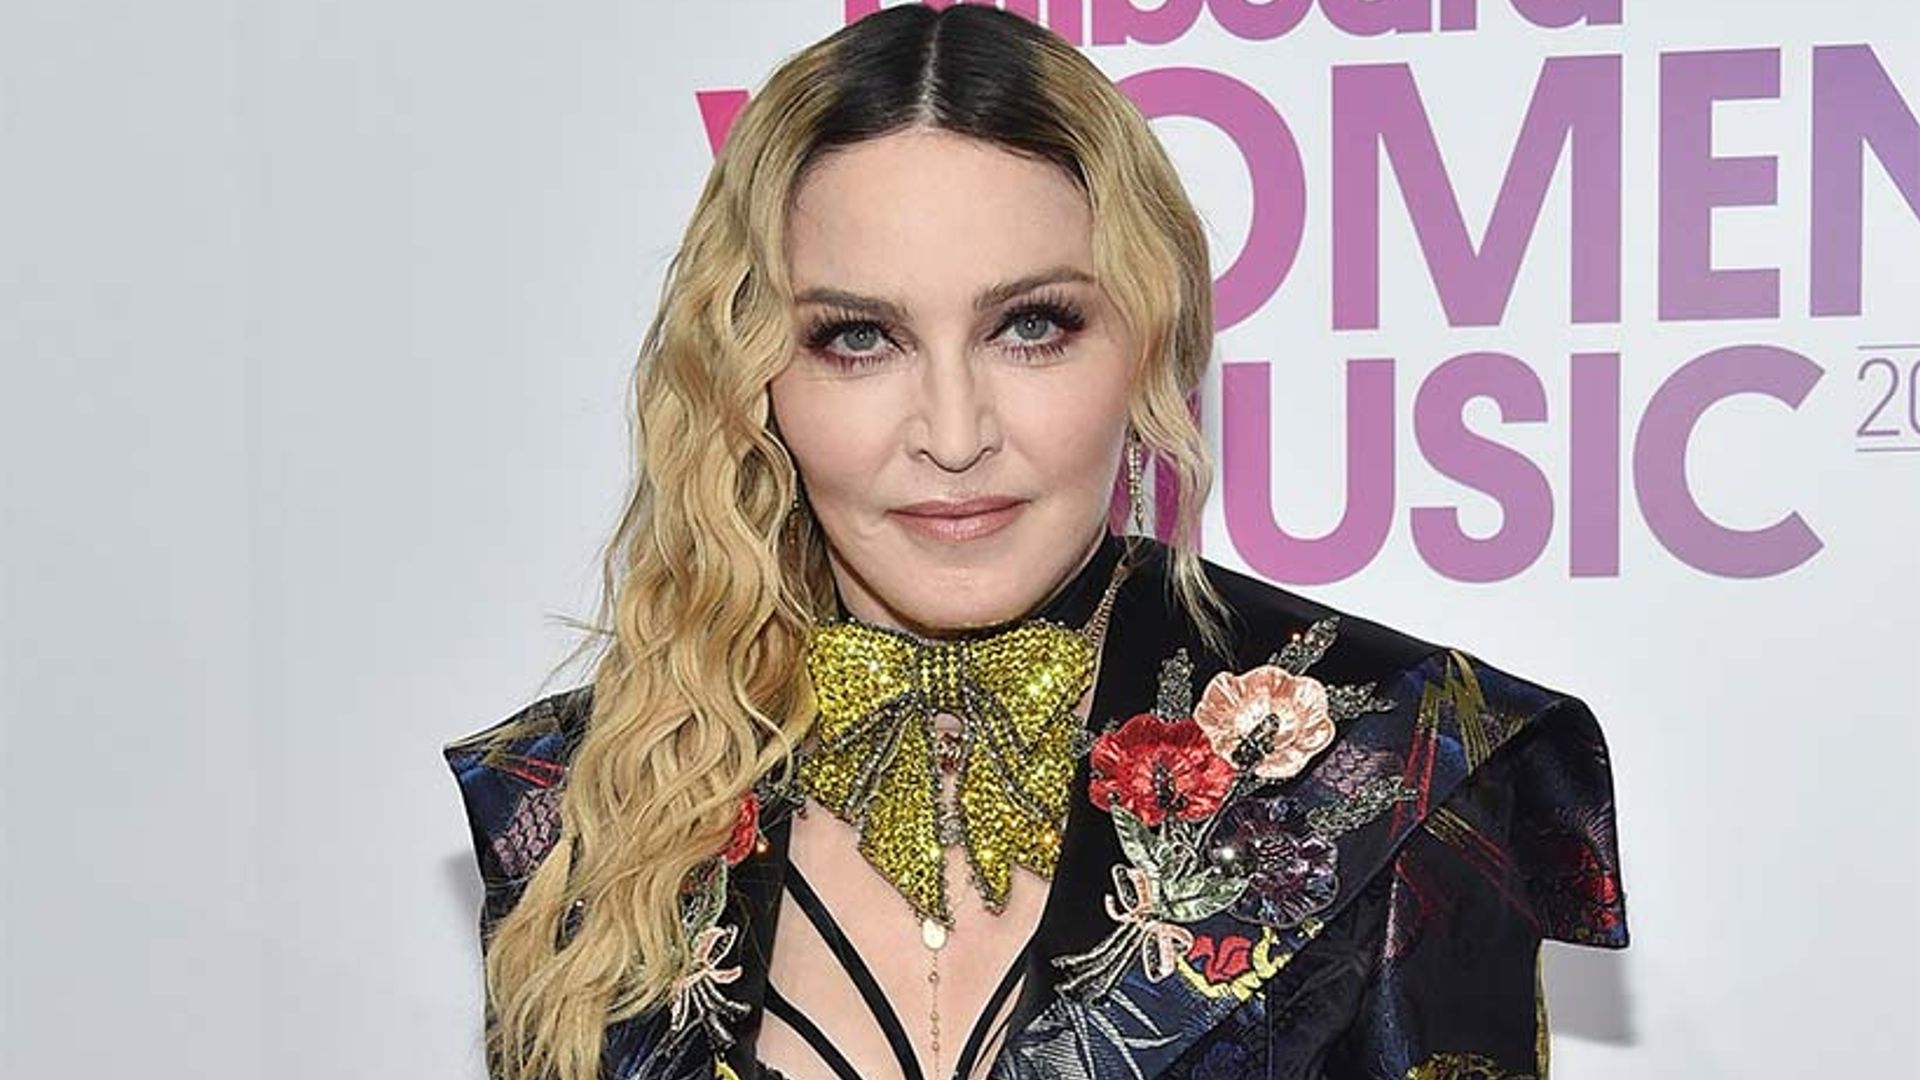 Madonna parties with Bono and Stella McCartney at Noel Gallagher’s 50th bash - see the photo!